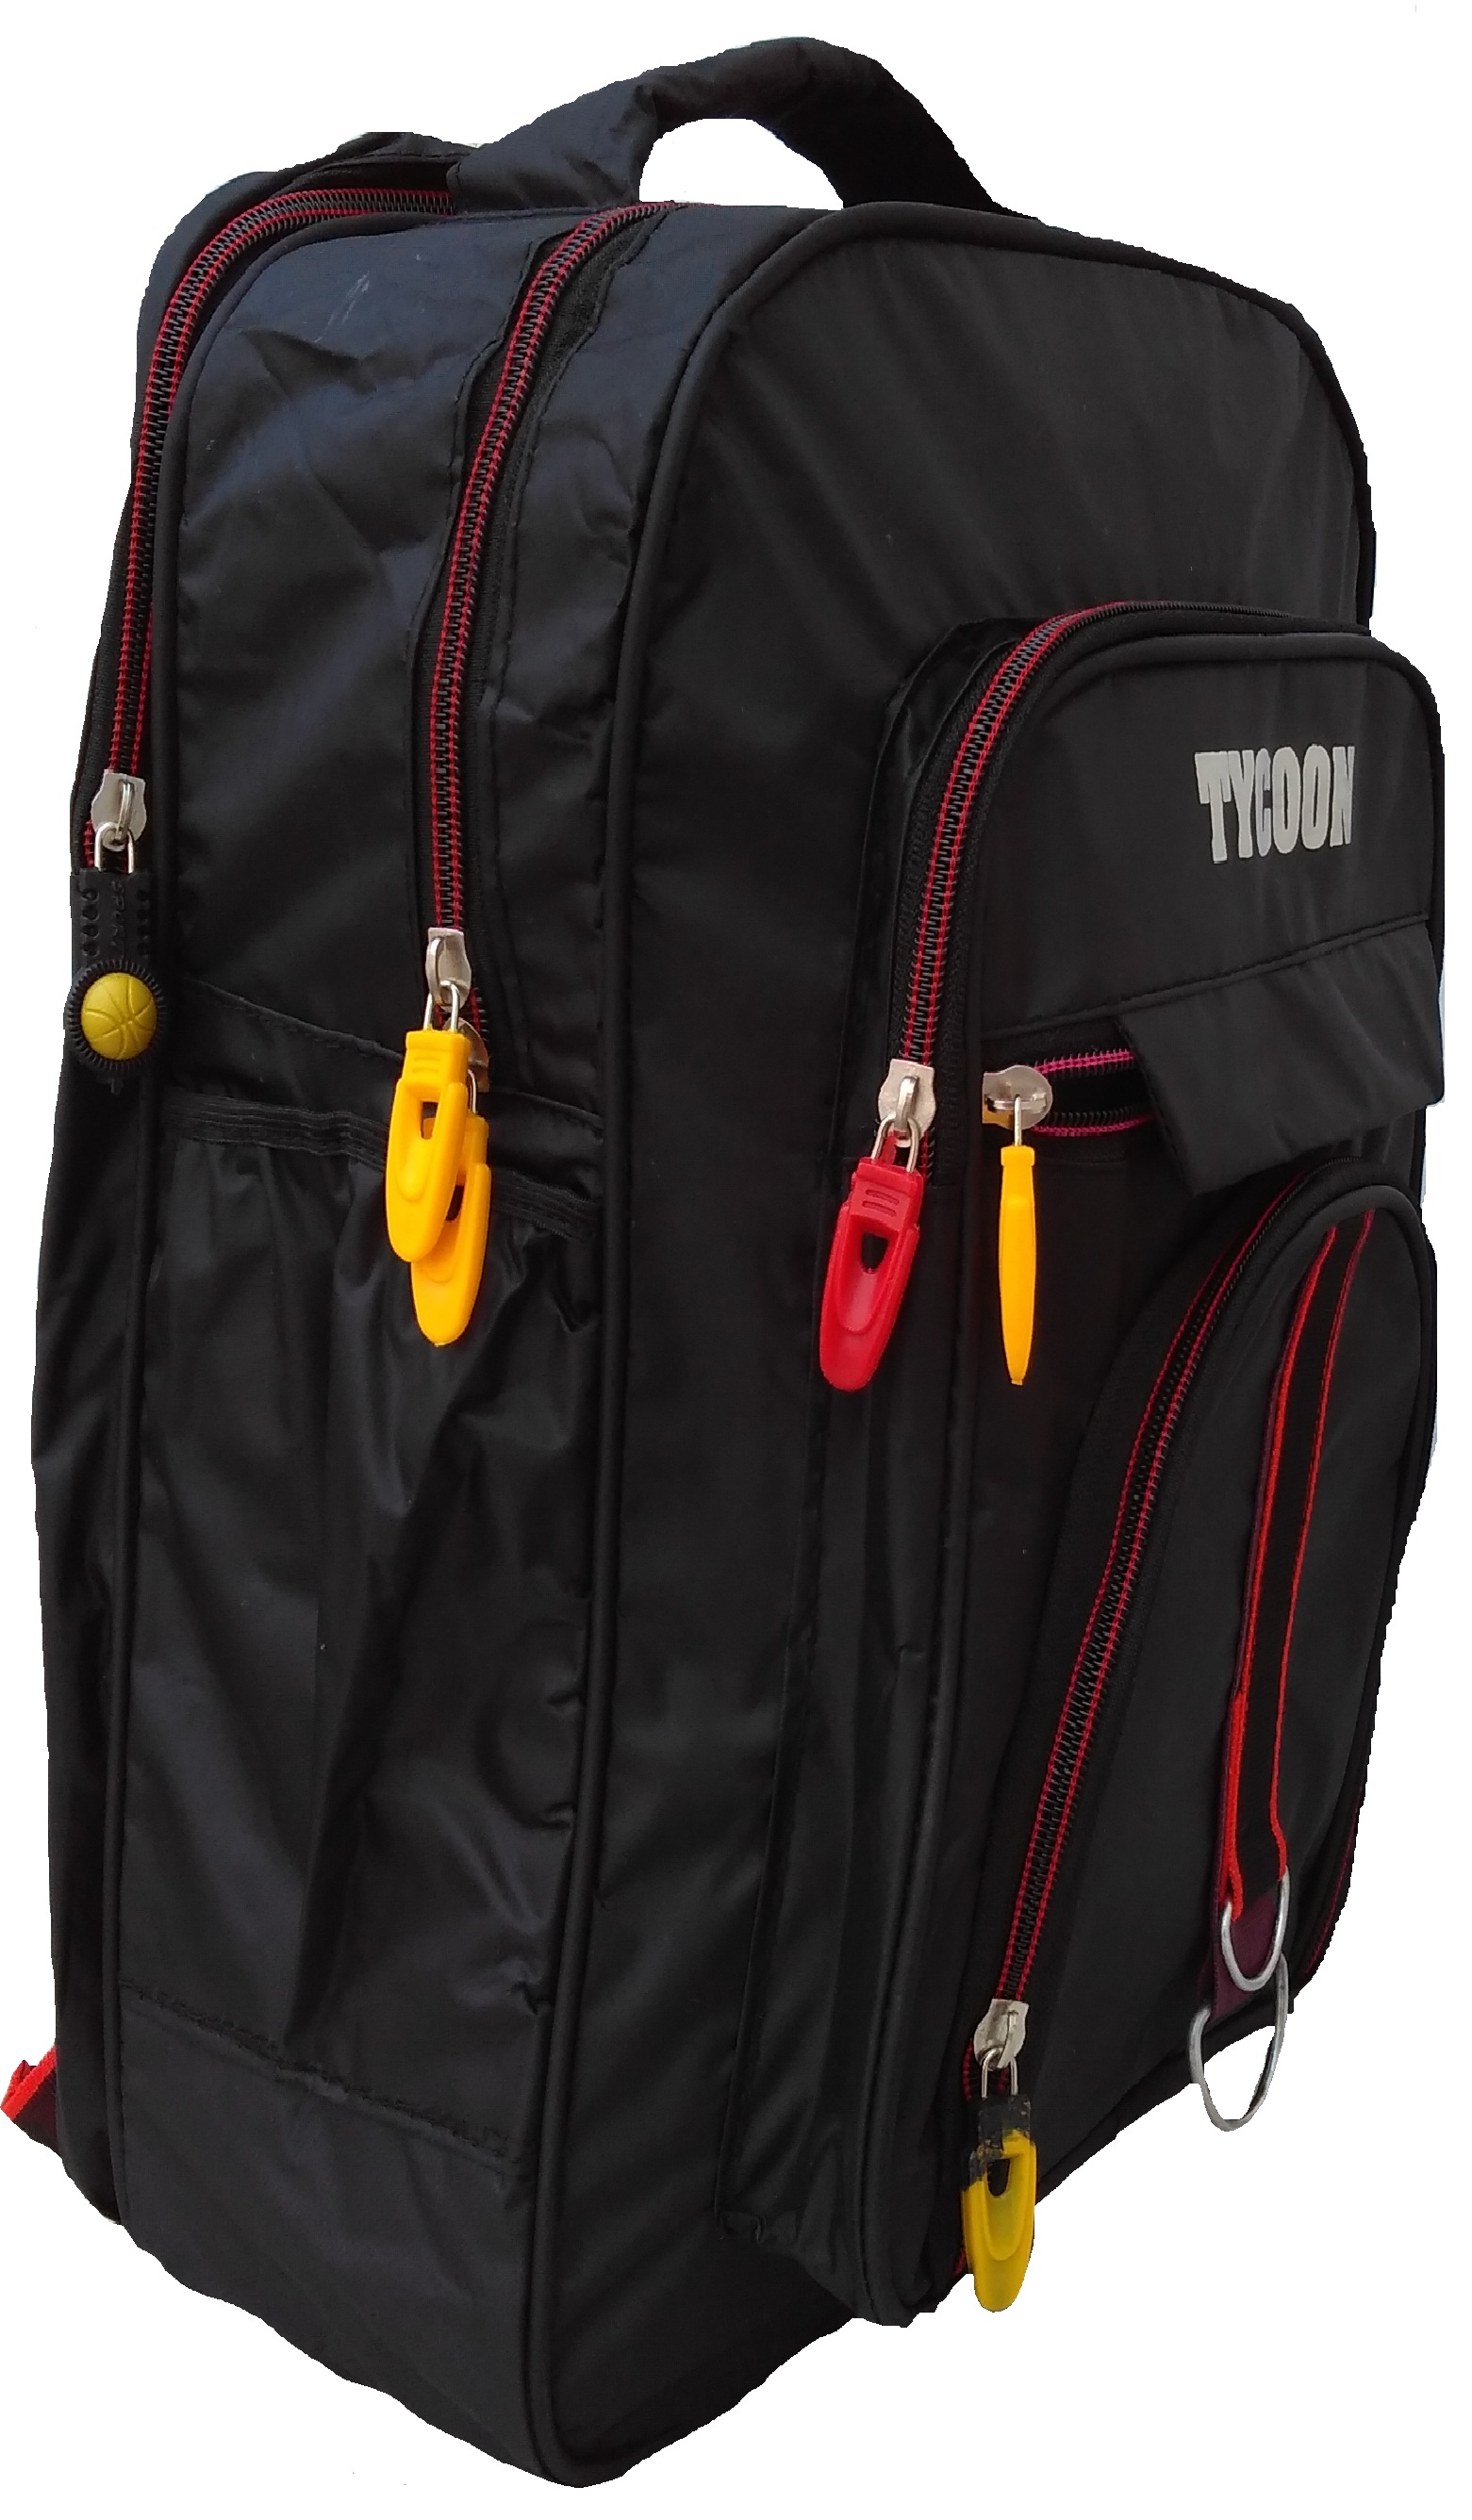 Buy Casual Unisex Backpack for Everyday Use Online @ ₹559 from ShopClues